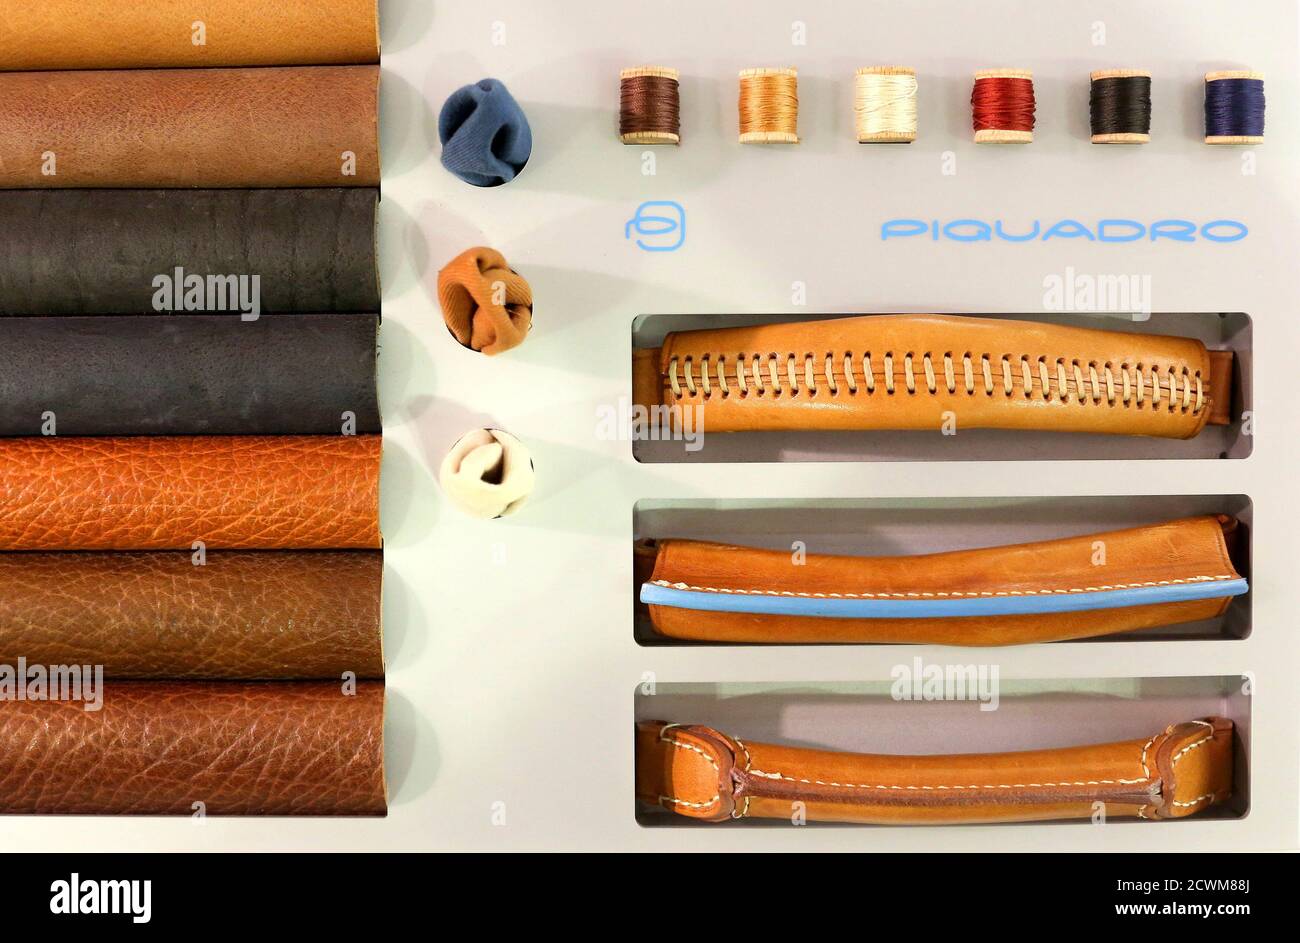 Brand For Leather Goods And Bags High Resolution Stock Photography and  Images - Alamy